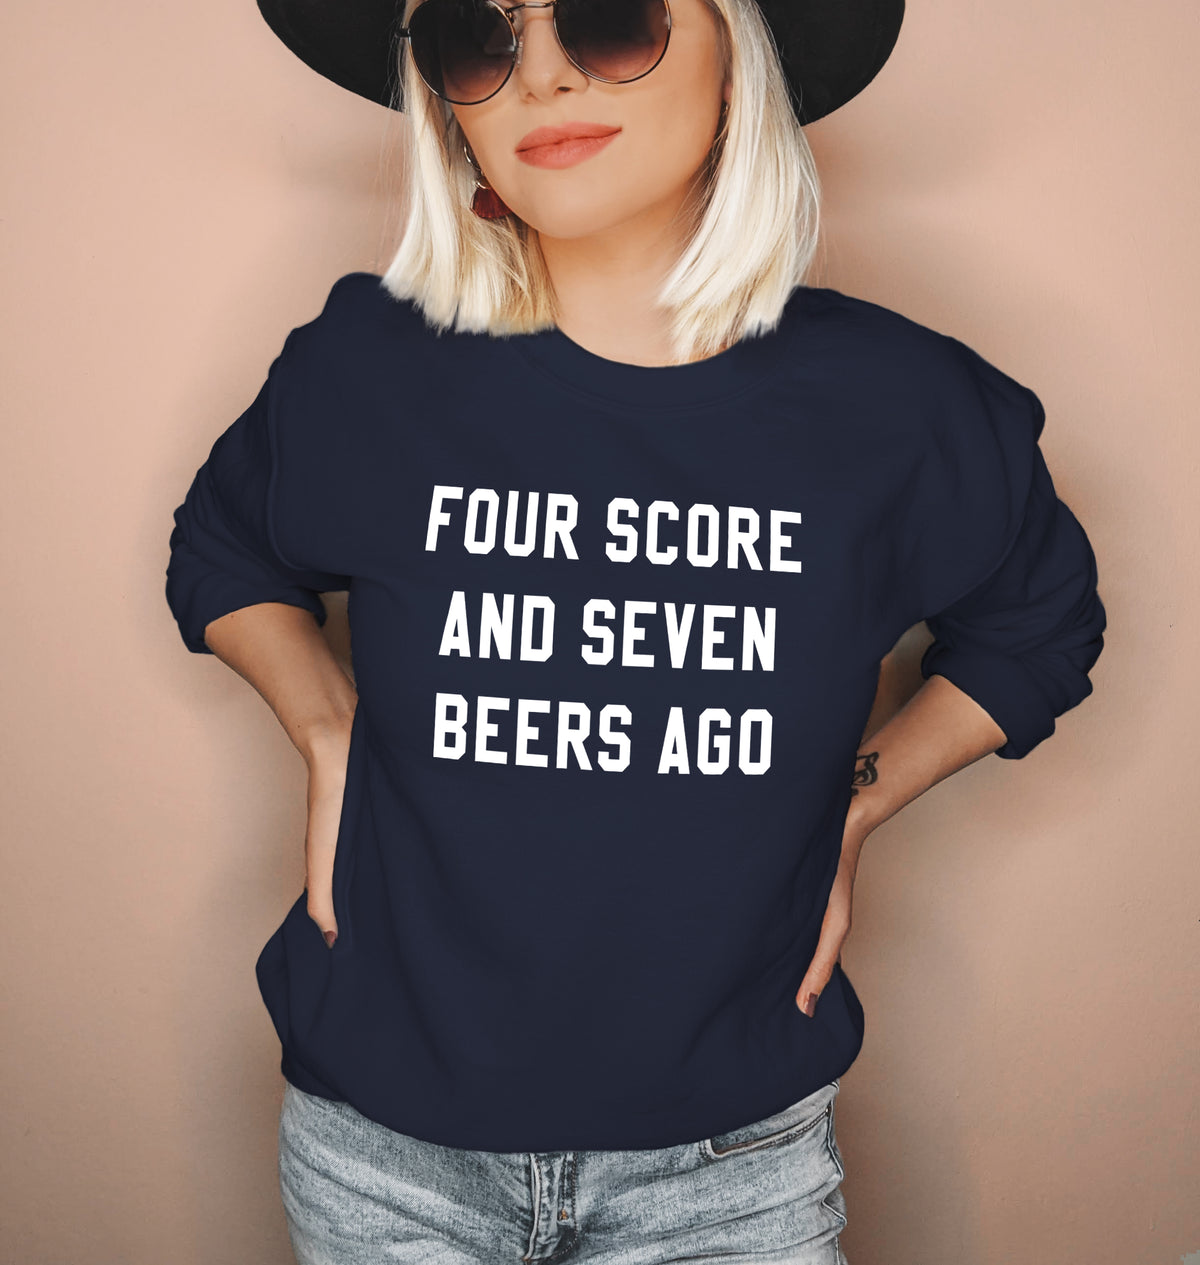 Navy sweatshirt that says four score and seven beers ago - HighCiti